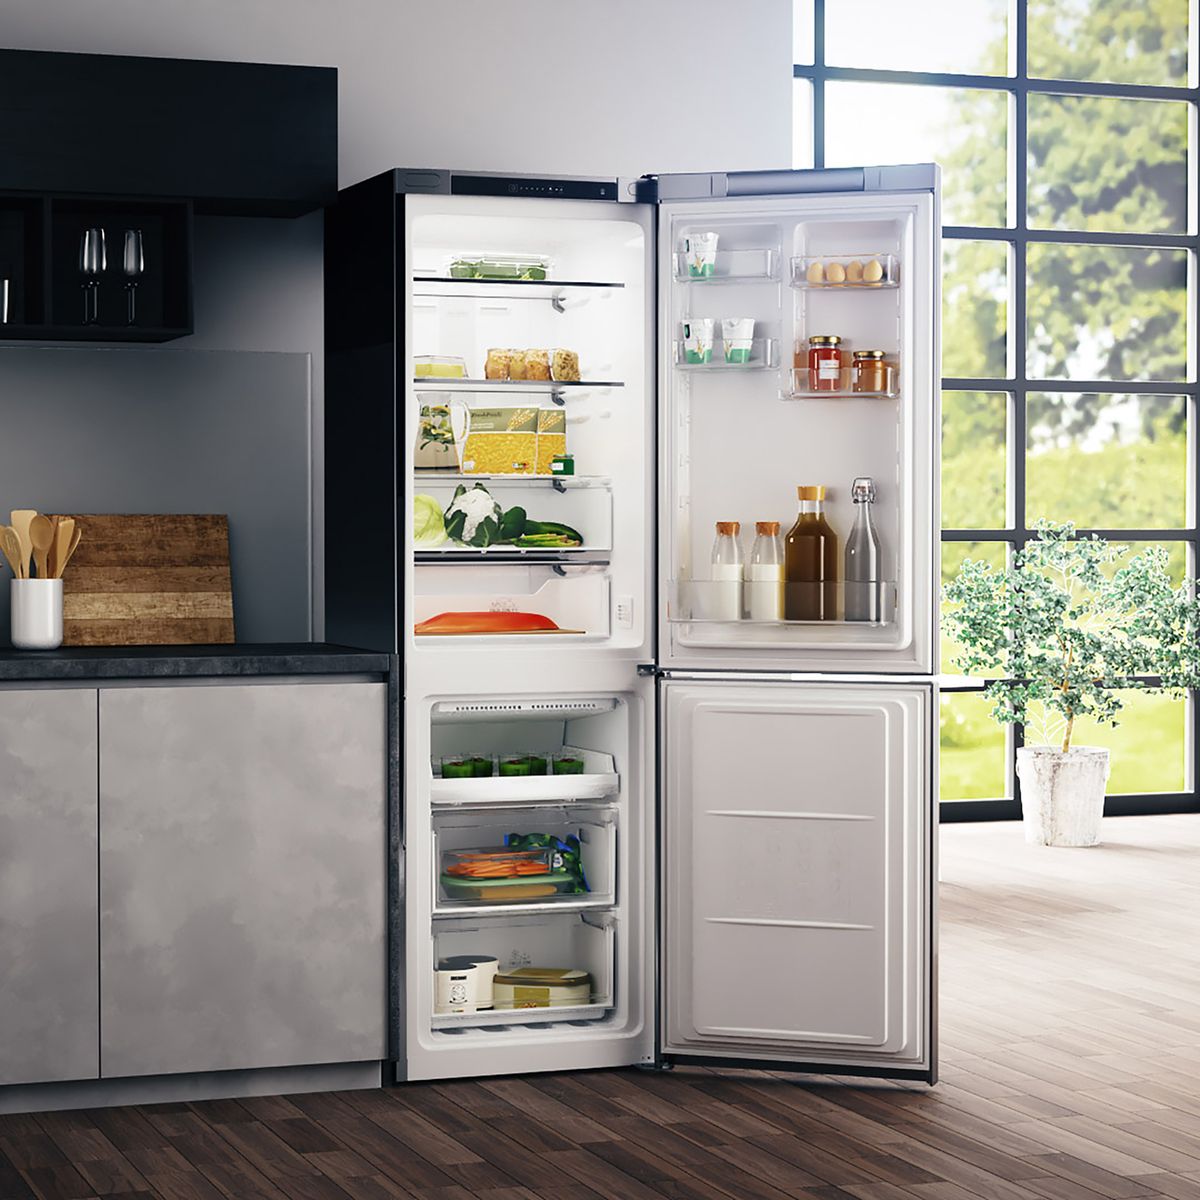 The best Fridge freezer deals ahead of Black Friday 2019 Real Homes